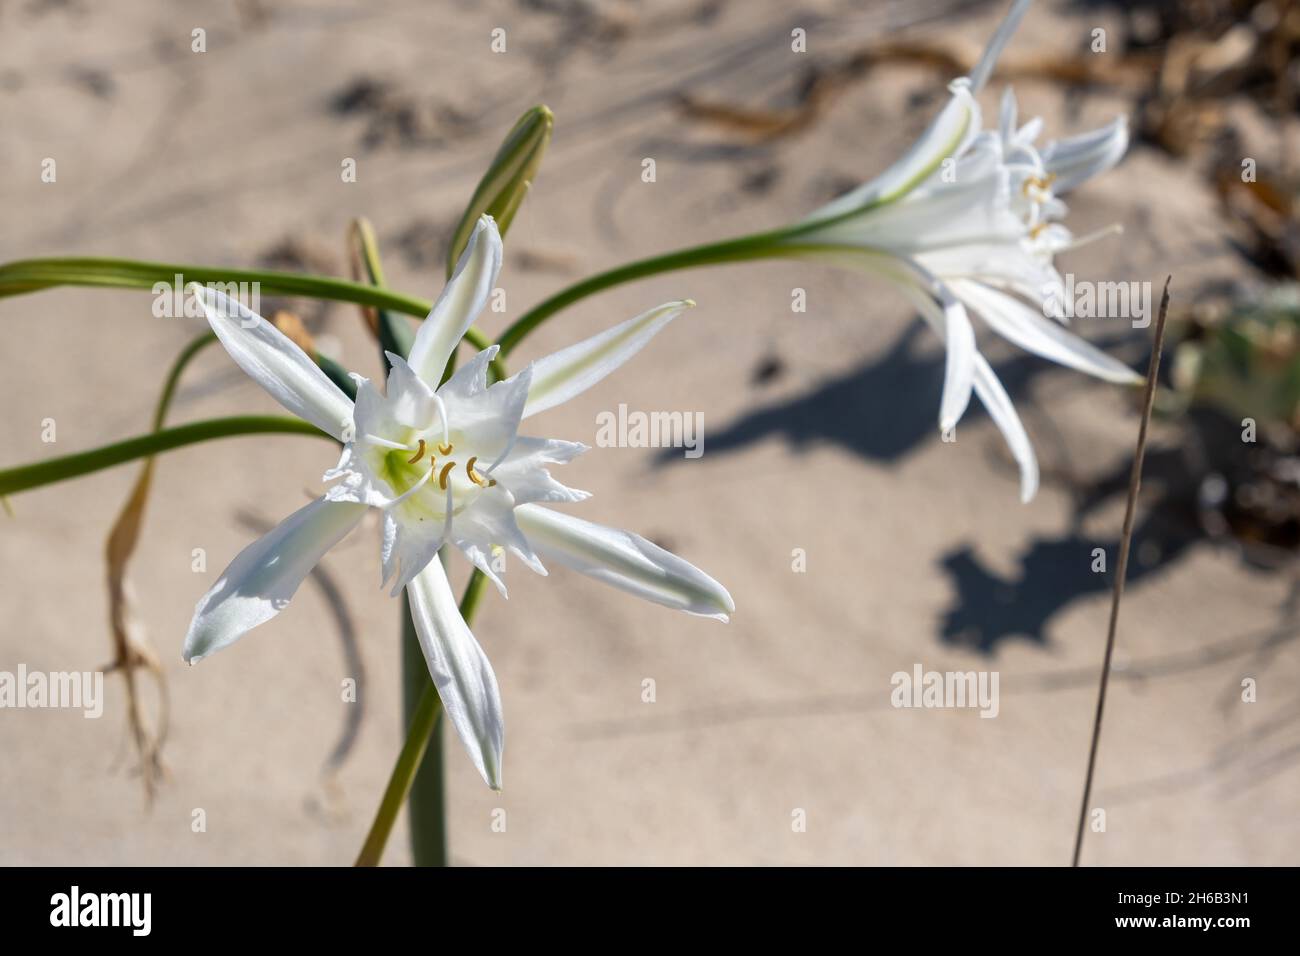 Sea daffodil, Pancratium maritimum, bulbous wild plant blooming, white flowers. Sand lily grows in sandy beach at Mediterranean seaside. Stock Photo